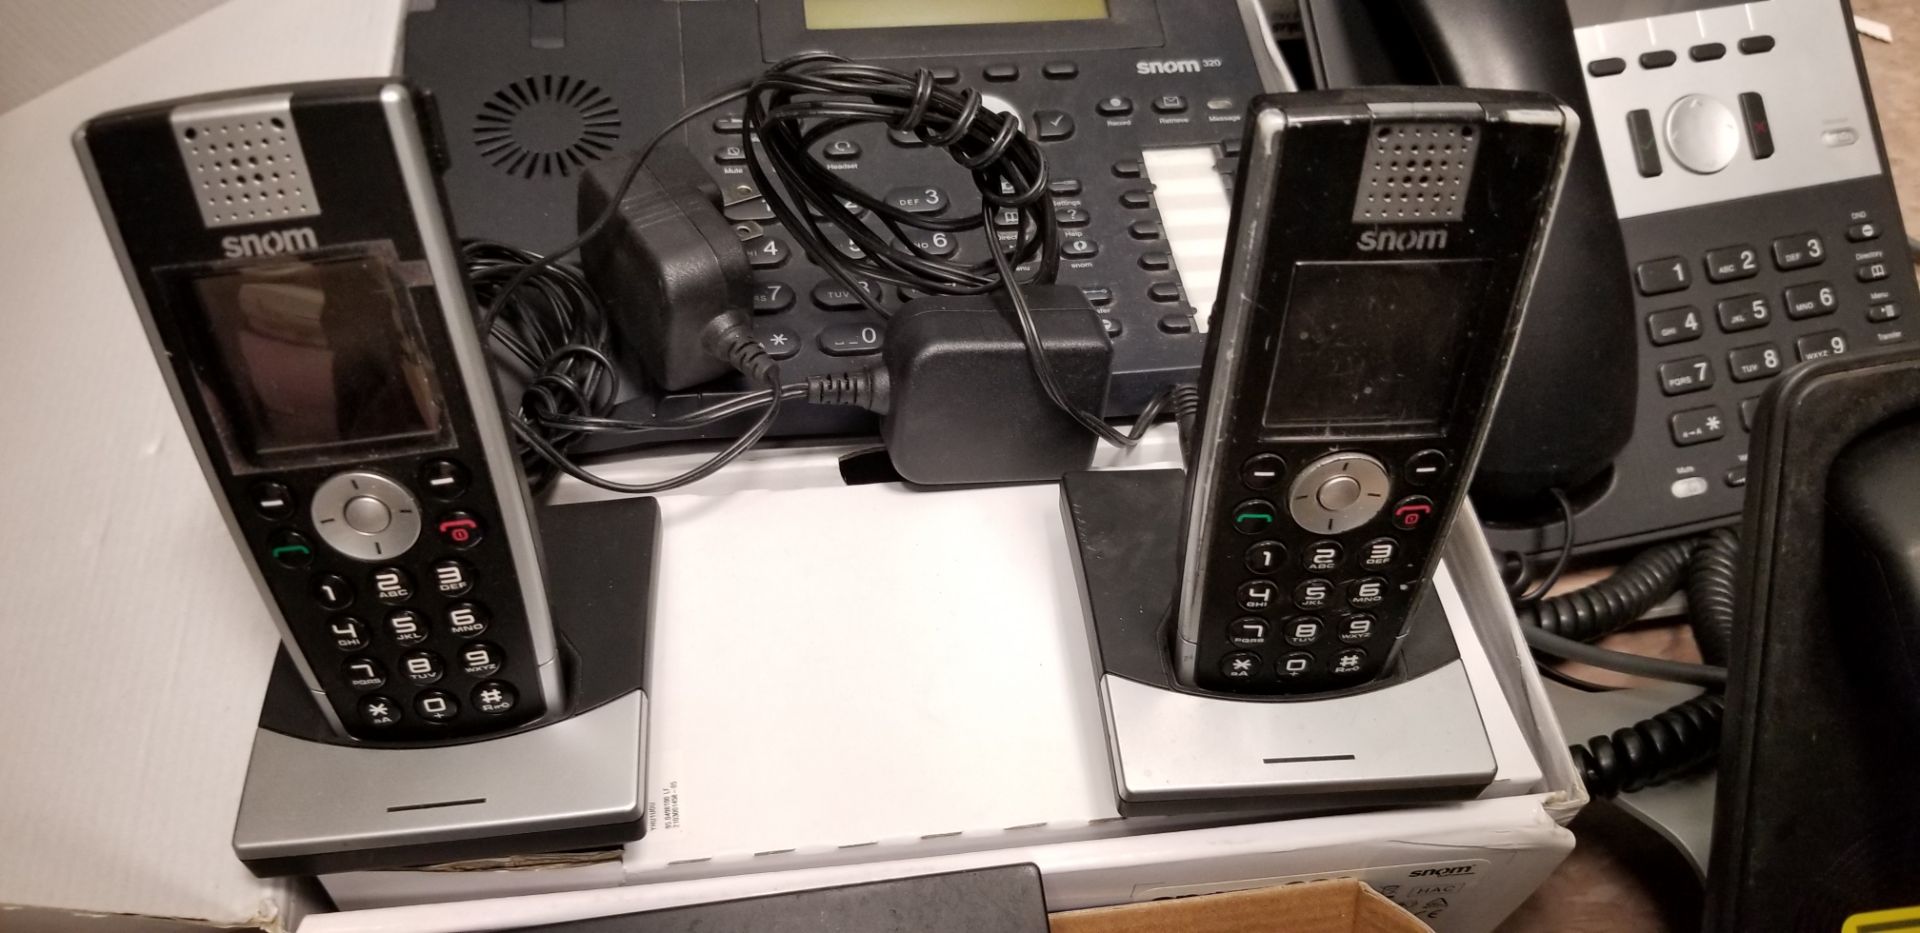 SNOM VOICE OVER I.P. W/ 4 HANDSETS , 2 CORDLESS PHONES - Image 5 of 5